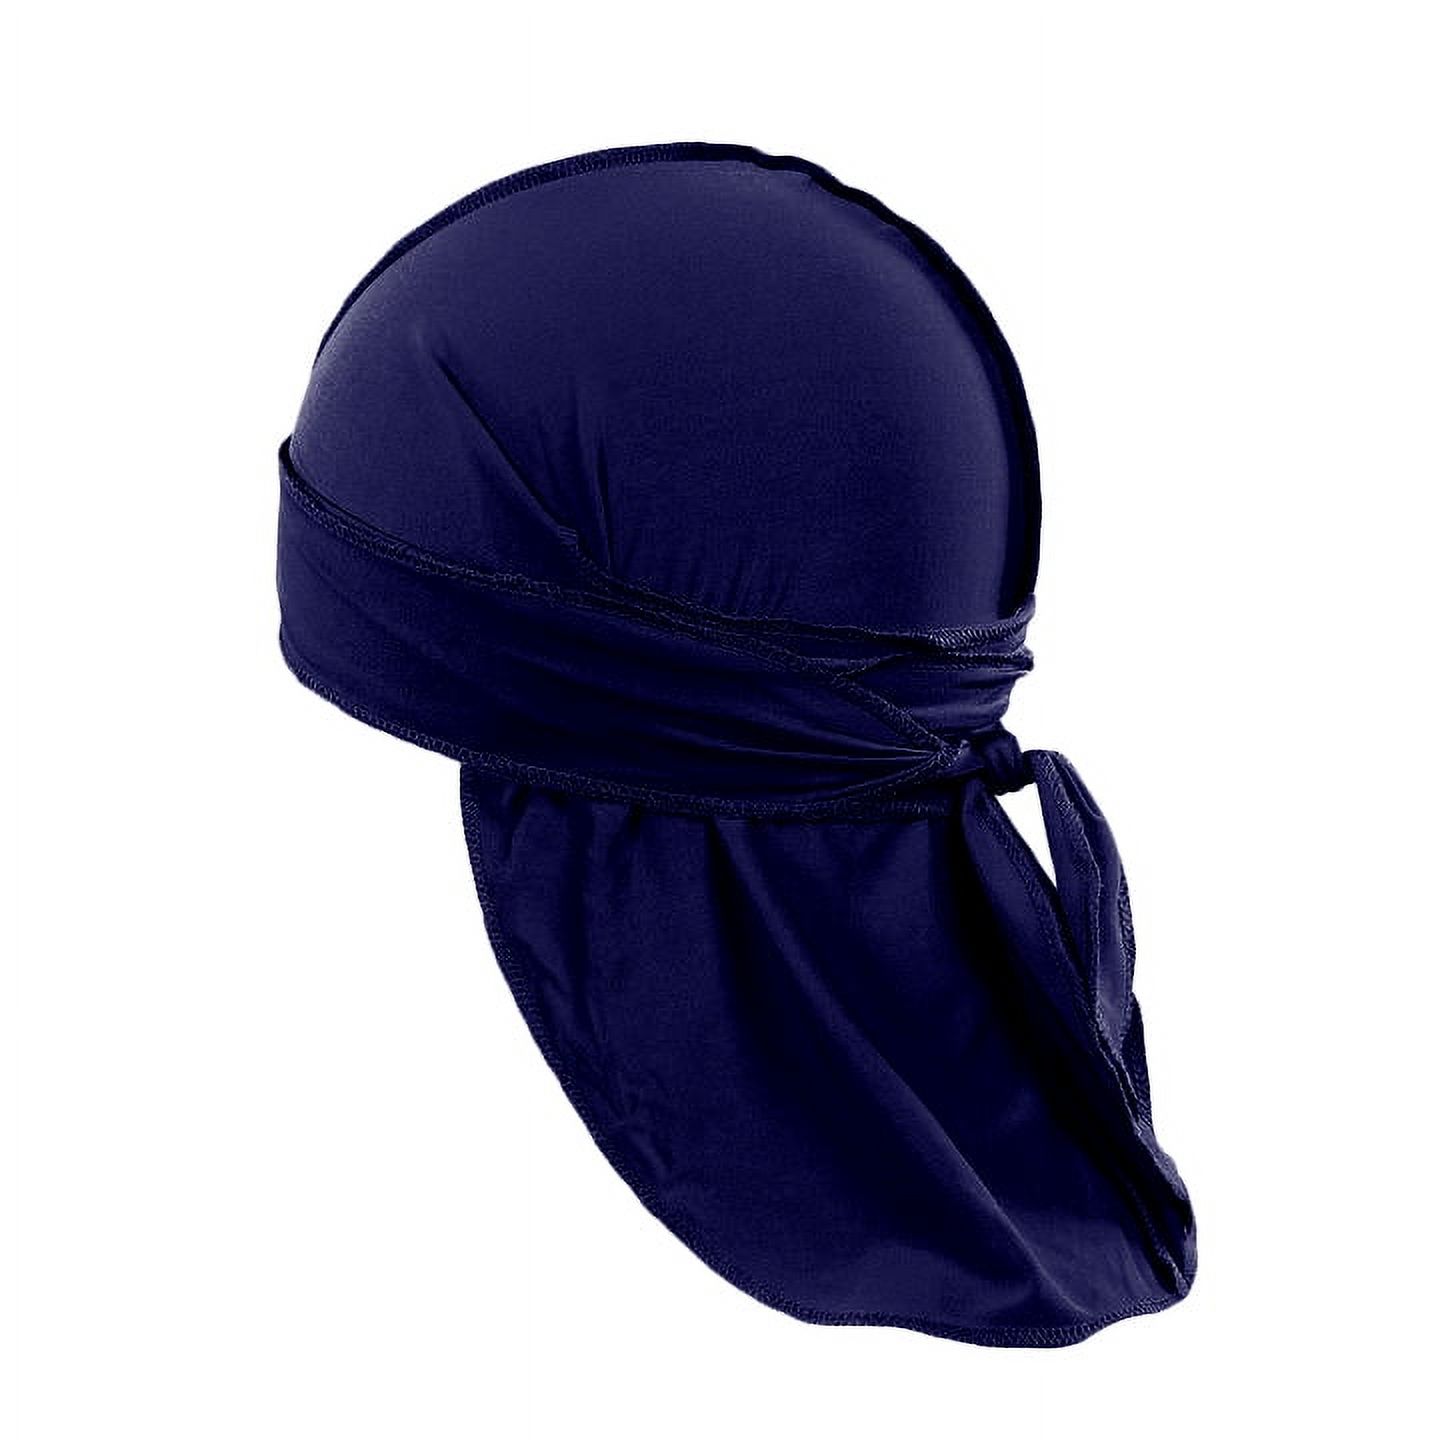 Pack of 3 Durags Headwrap for Men Waves Headscarf Bandana Doo Rag Tail (Navy Blue) - image 1 of 4